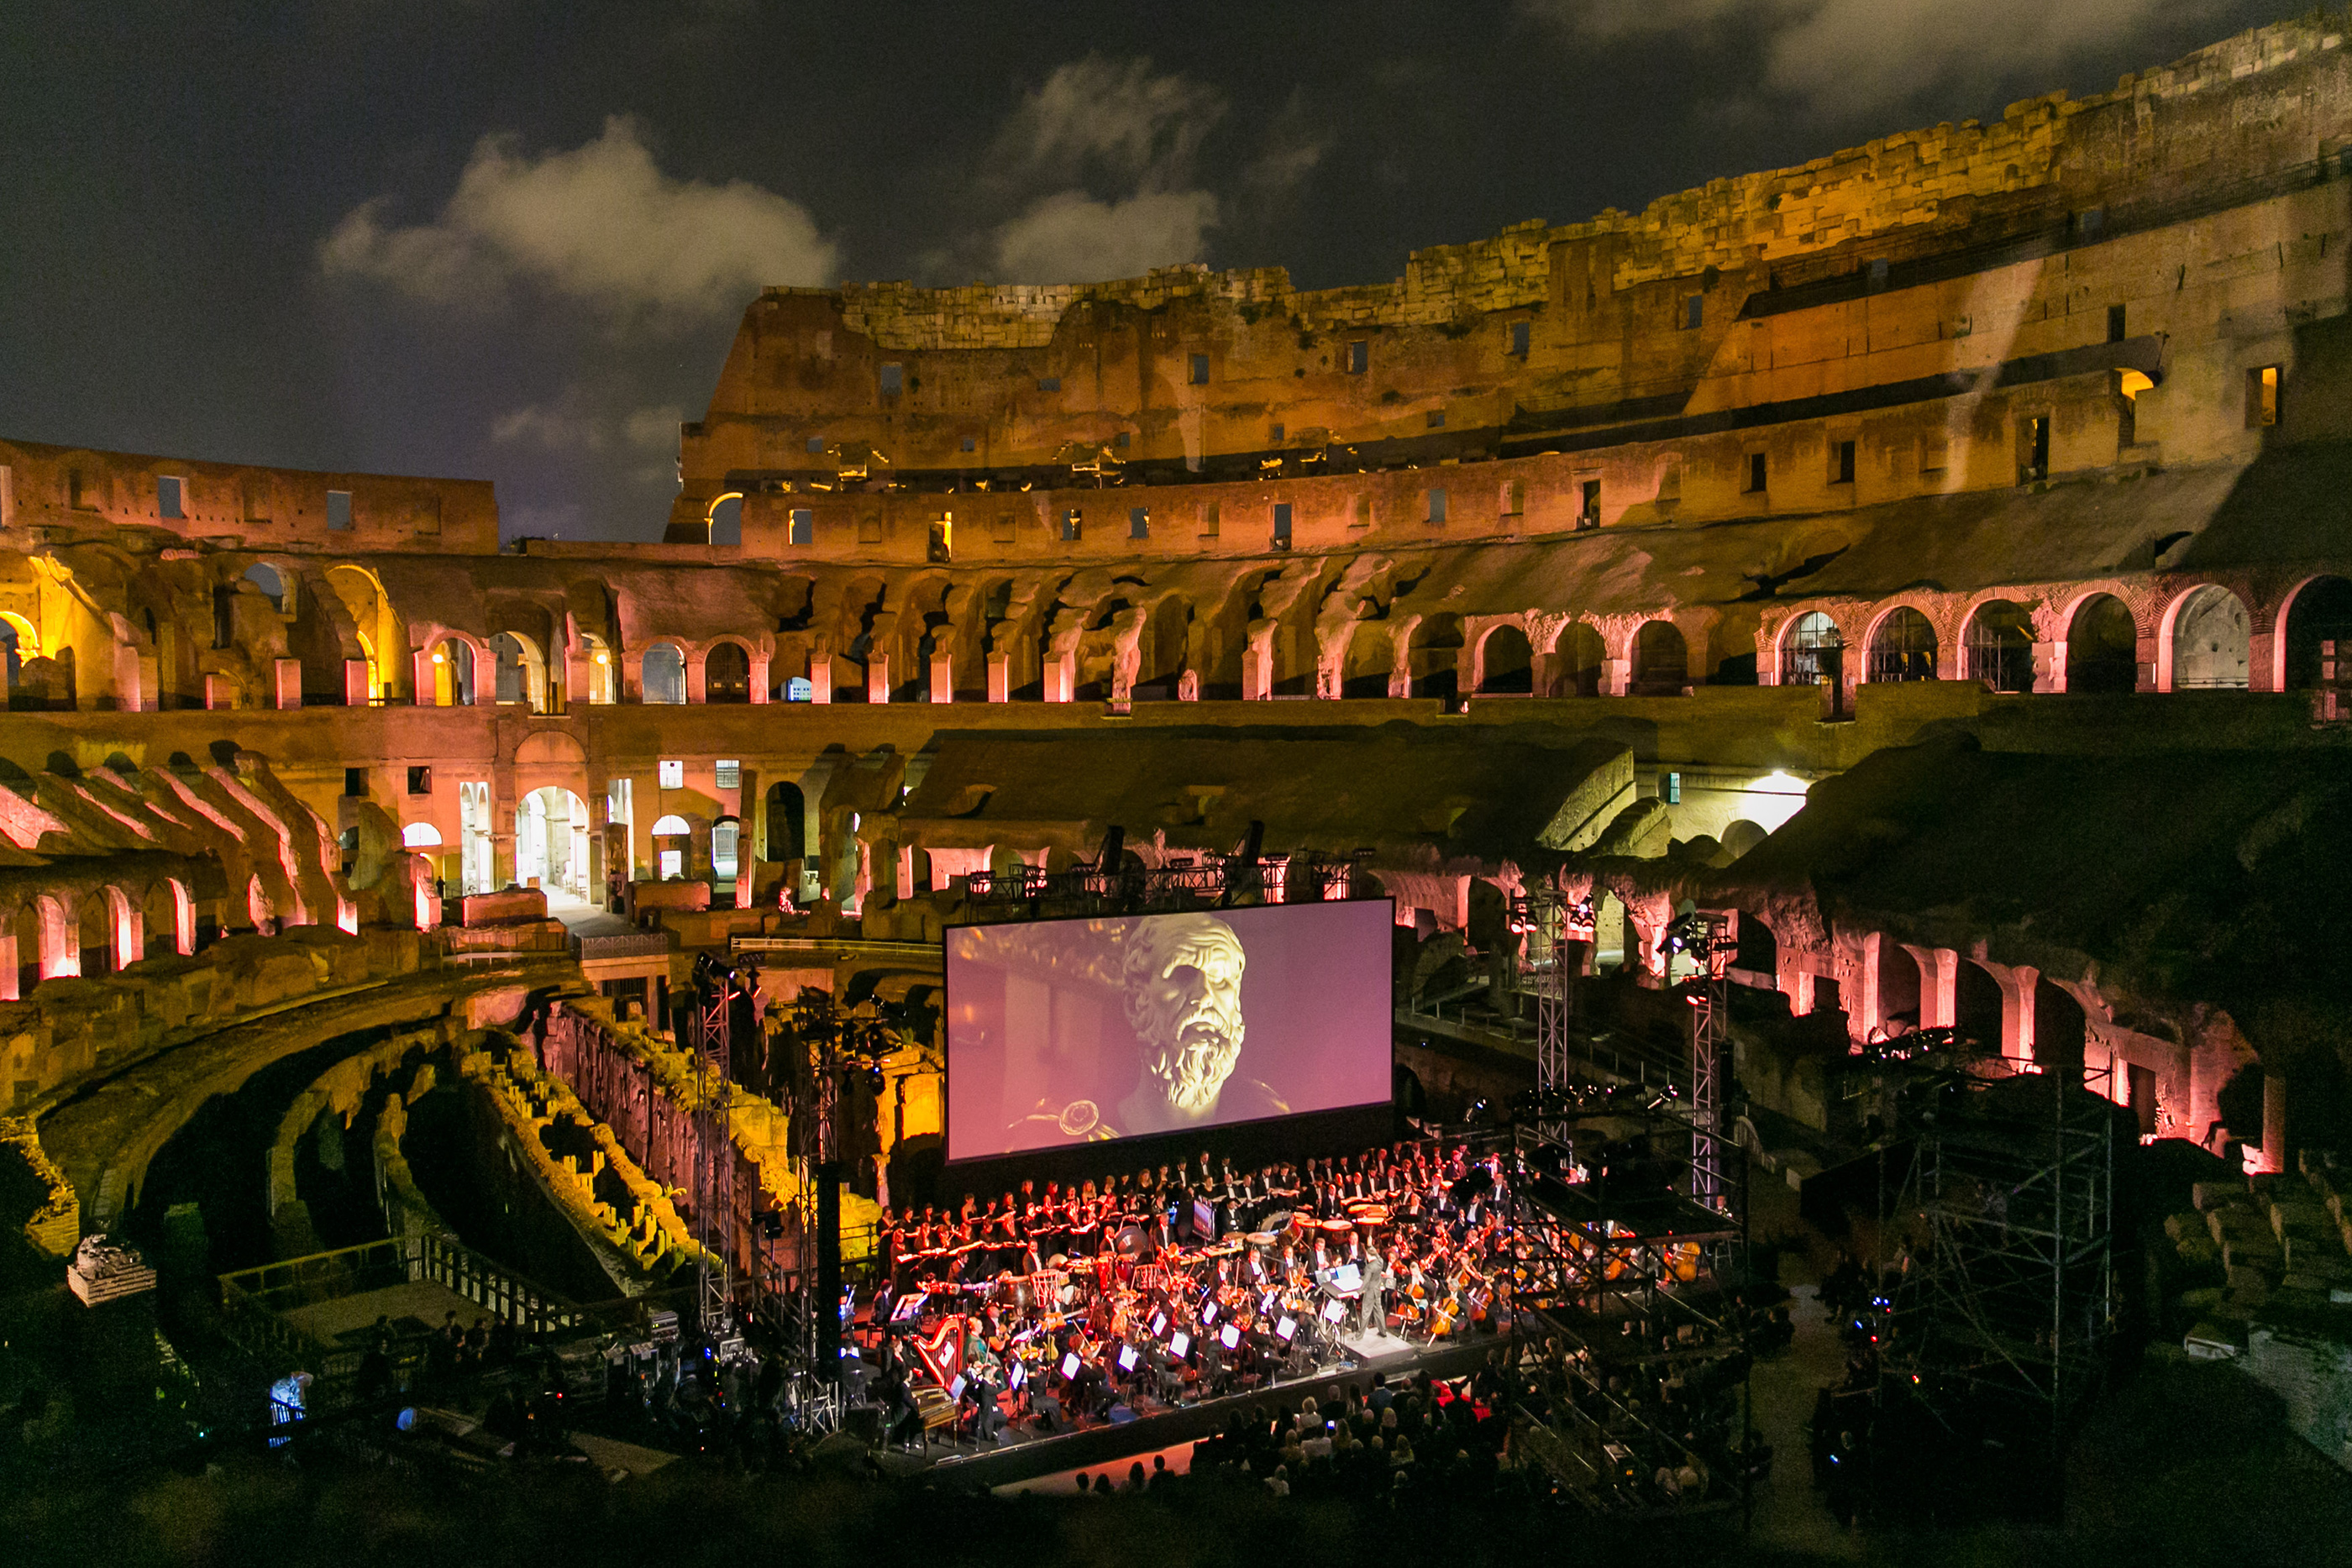 Actor Russell Crowe and co-stars of the Oscar-winning movie “Gladiator” gathered 6 June for a special End Polio Now fundraising event inside the Colosseum in Rome, Italy. 